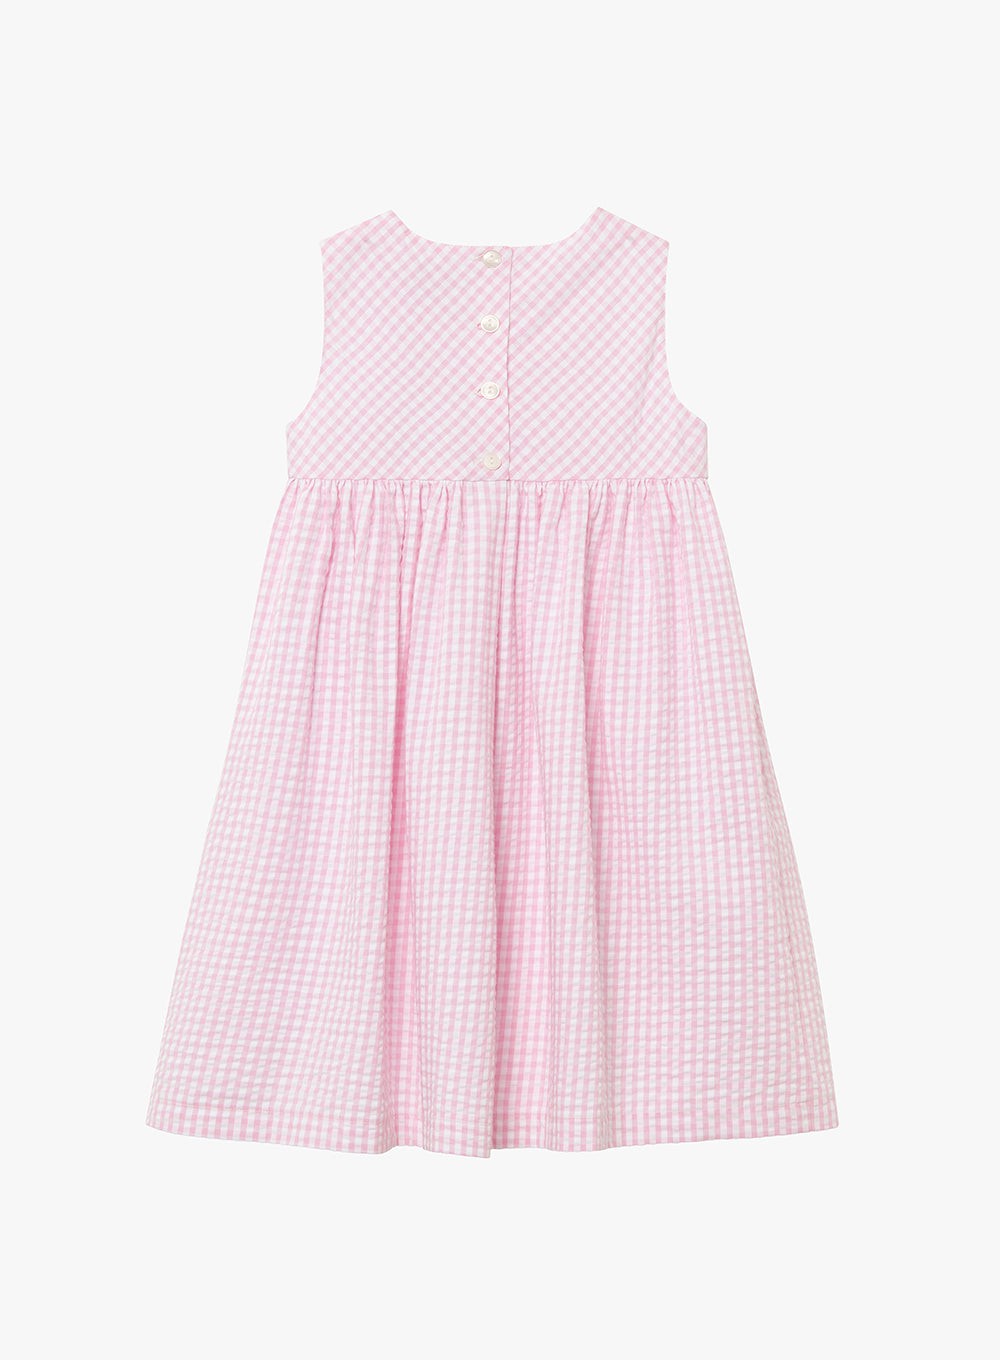 Confiture Girls Jemima Gingham Pinafore Pale Pink Gingham | Trotters#N ...